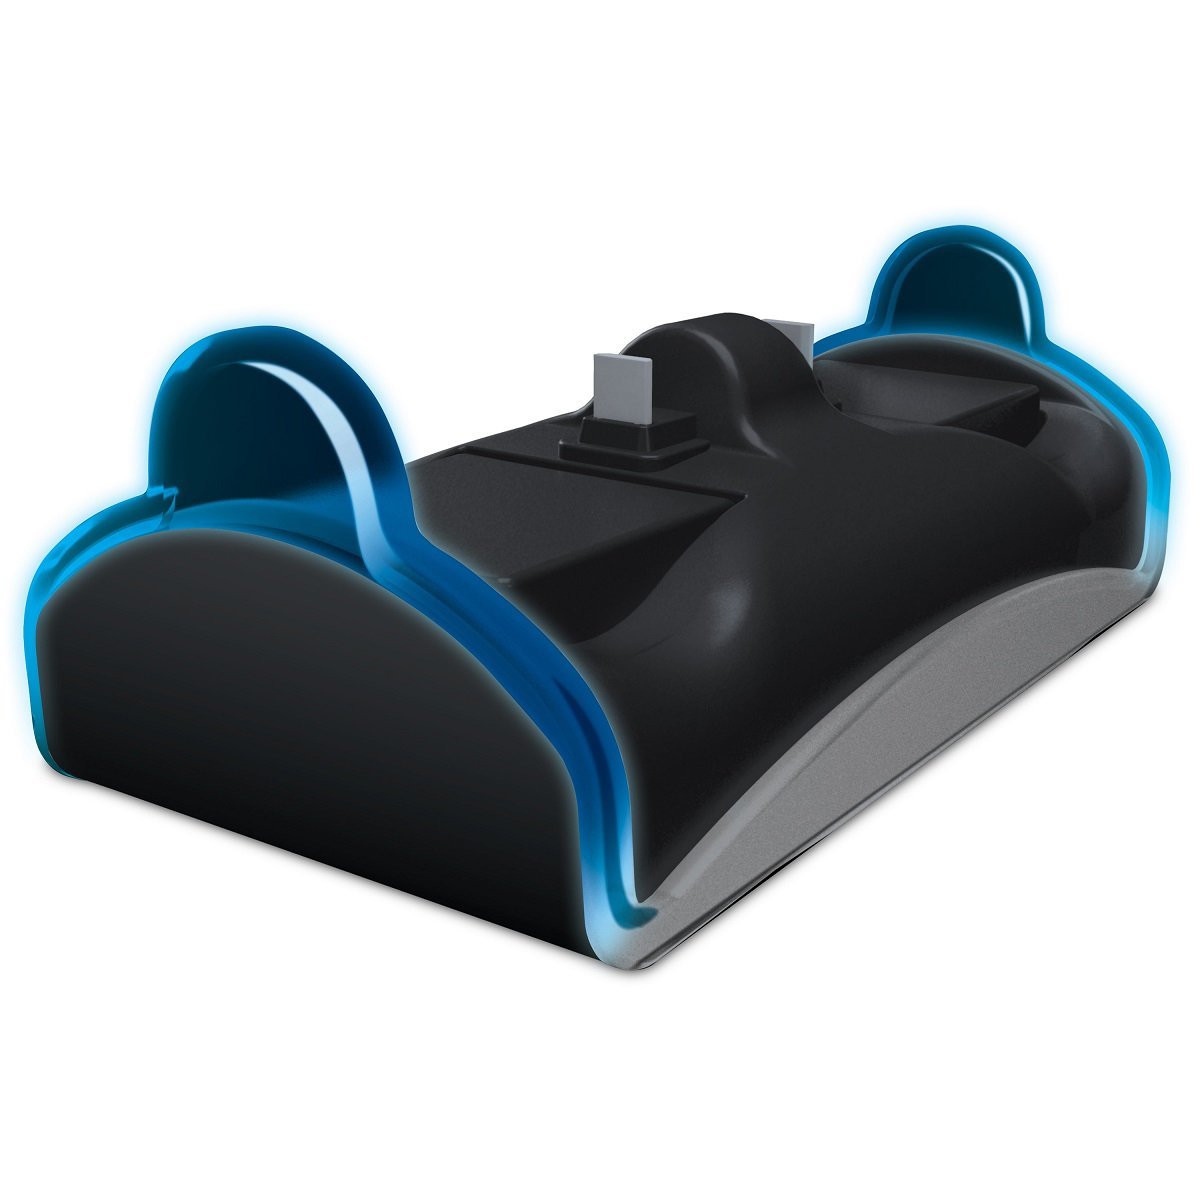 Dual Charging Dream Gear Dock For Ps4